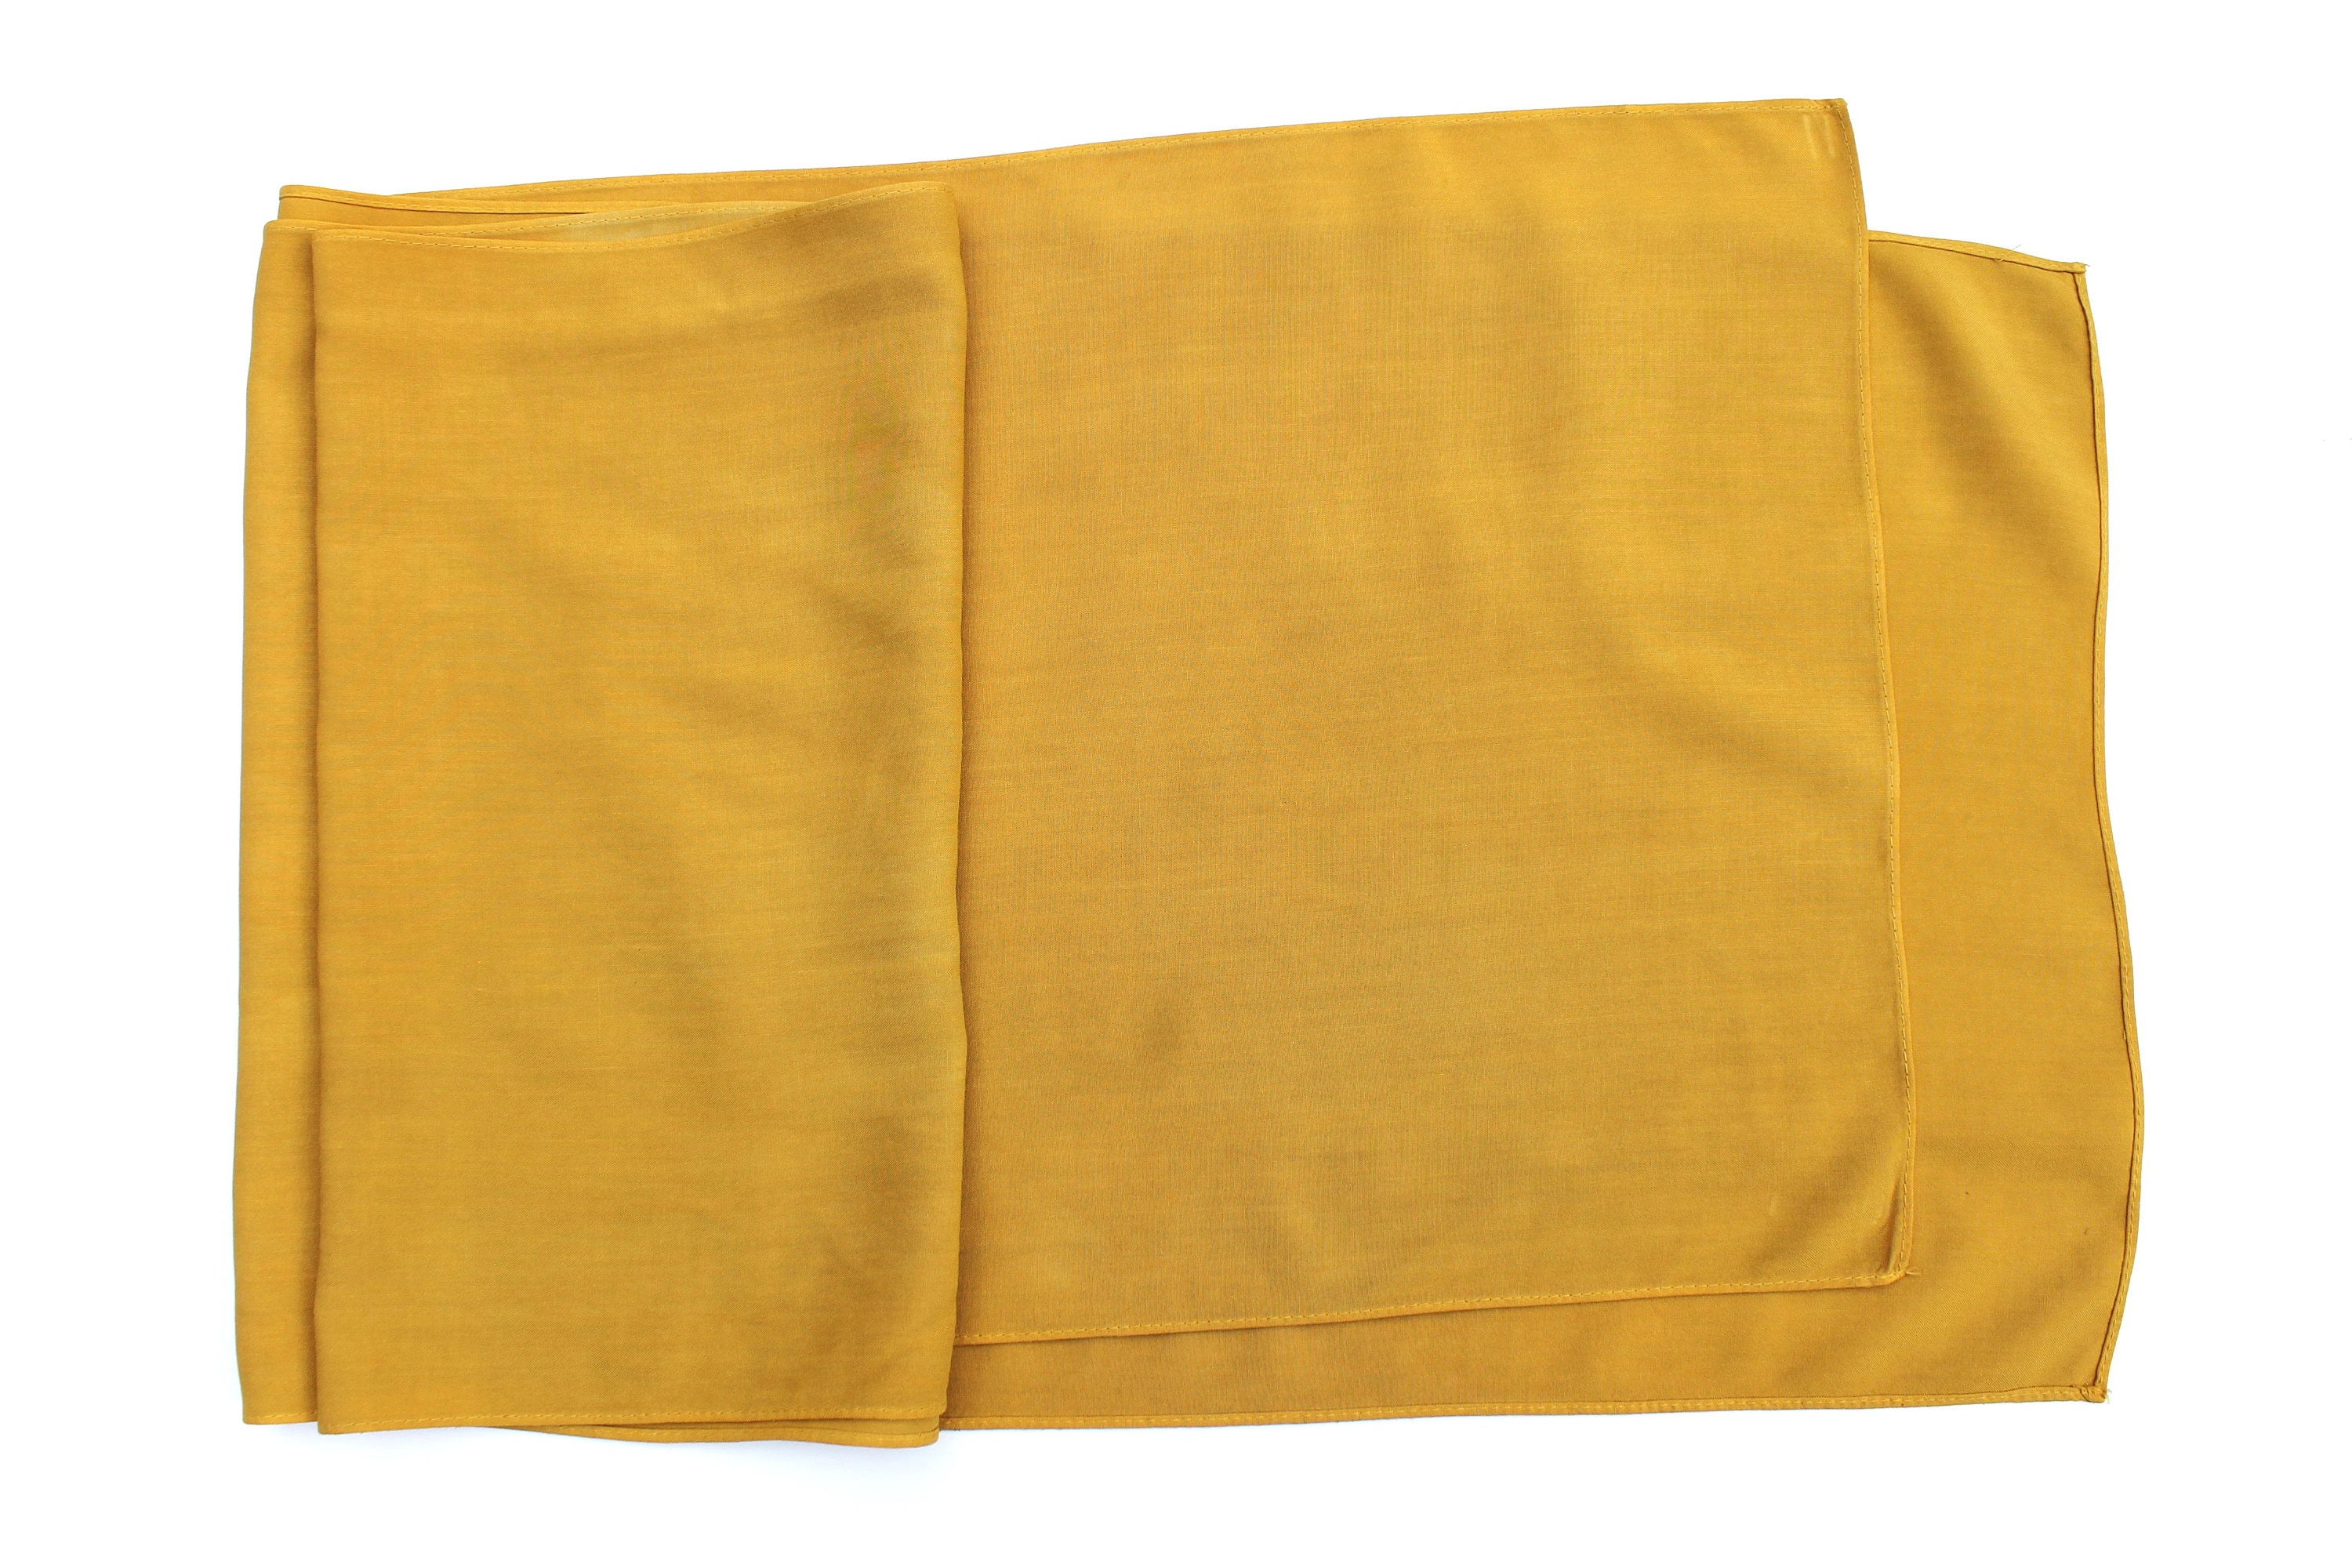 Golden Yellow Scarf for Men or Women in Bamboo Rayon. - Etsy